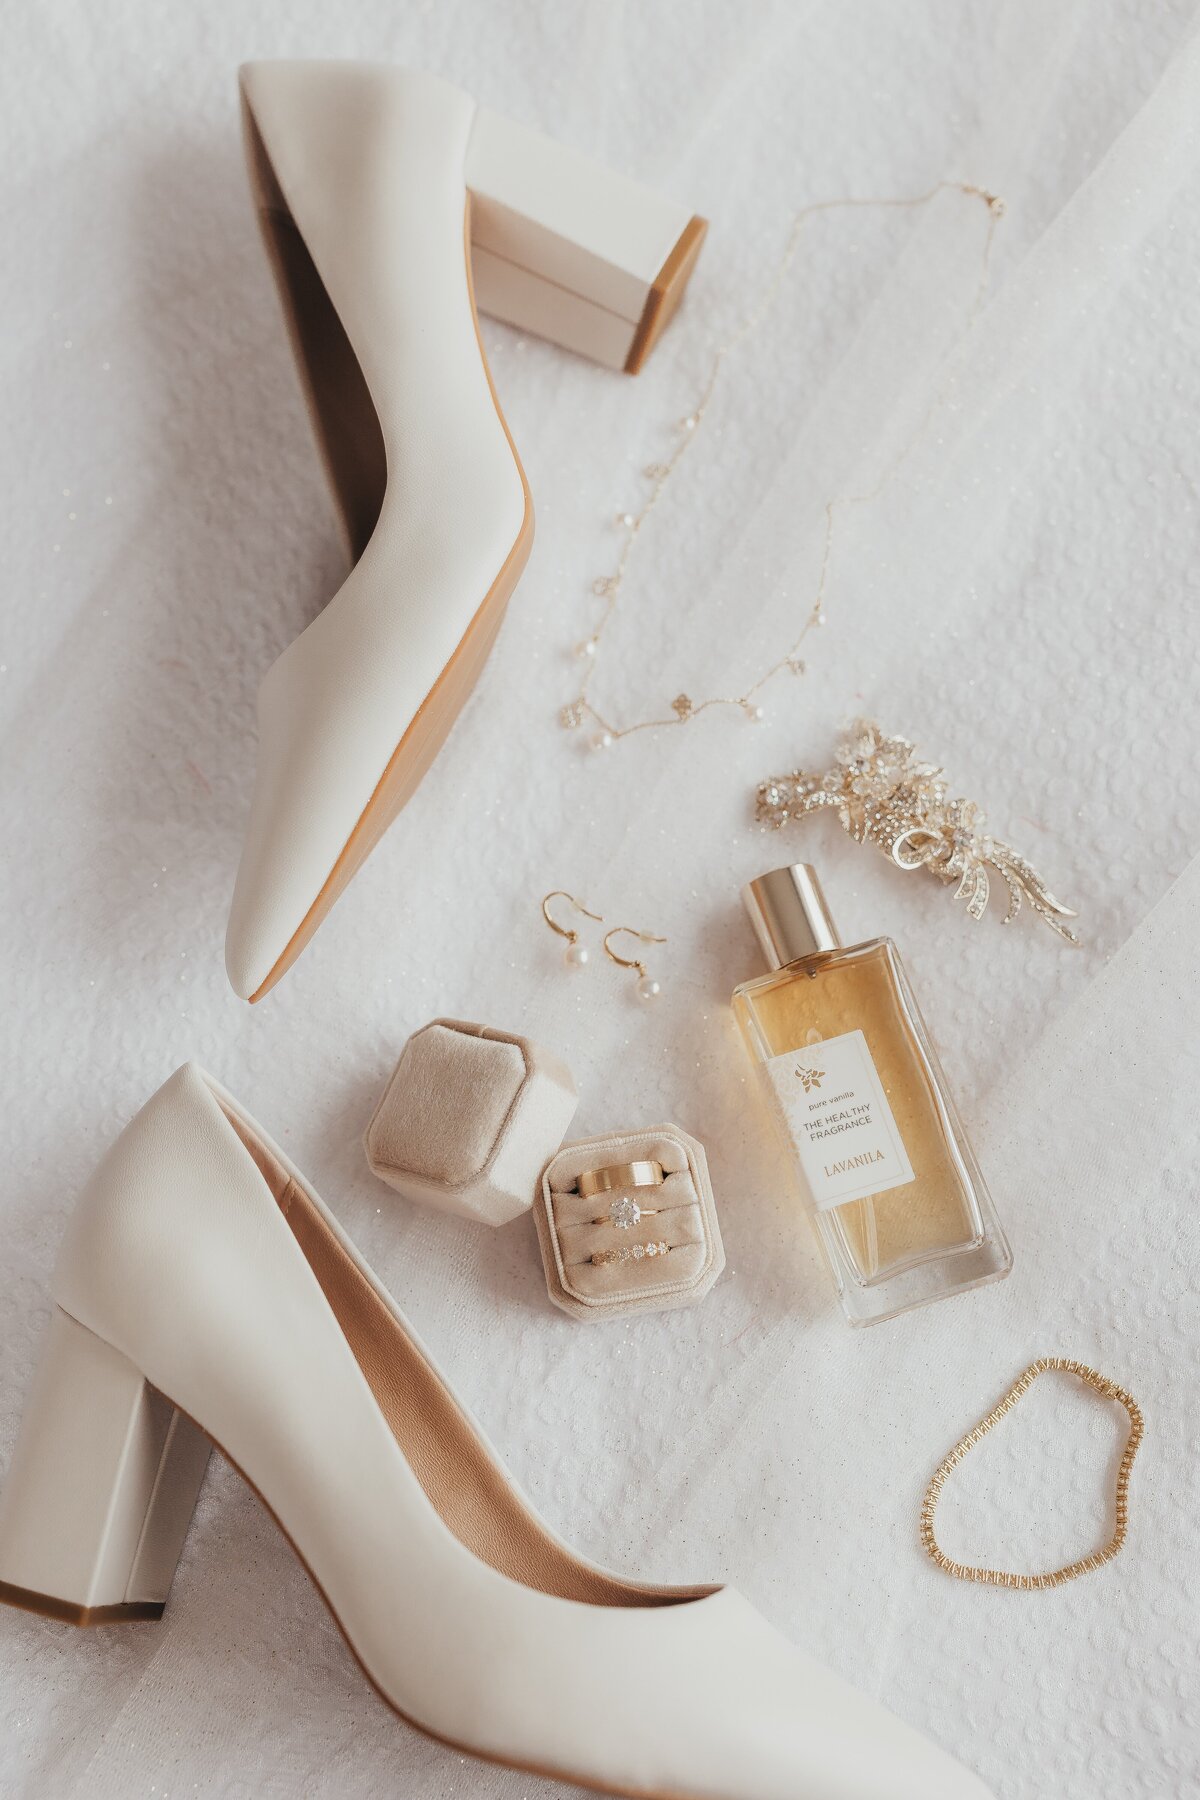 White high-heeled shoes with jewelry and a perfume bottle on a textured white fabric, perfect for Iowa weddings.